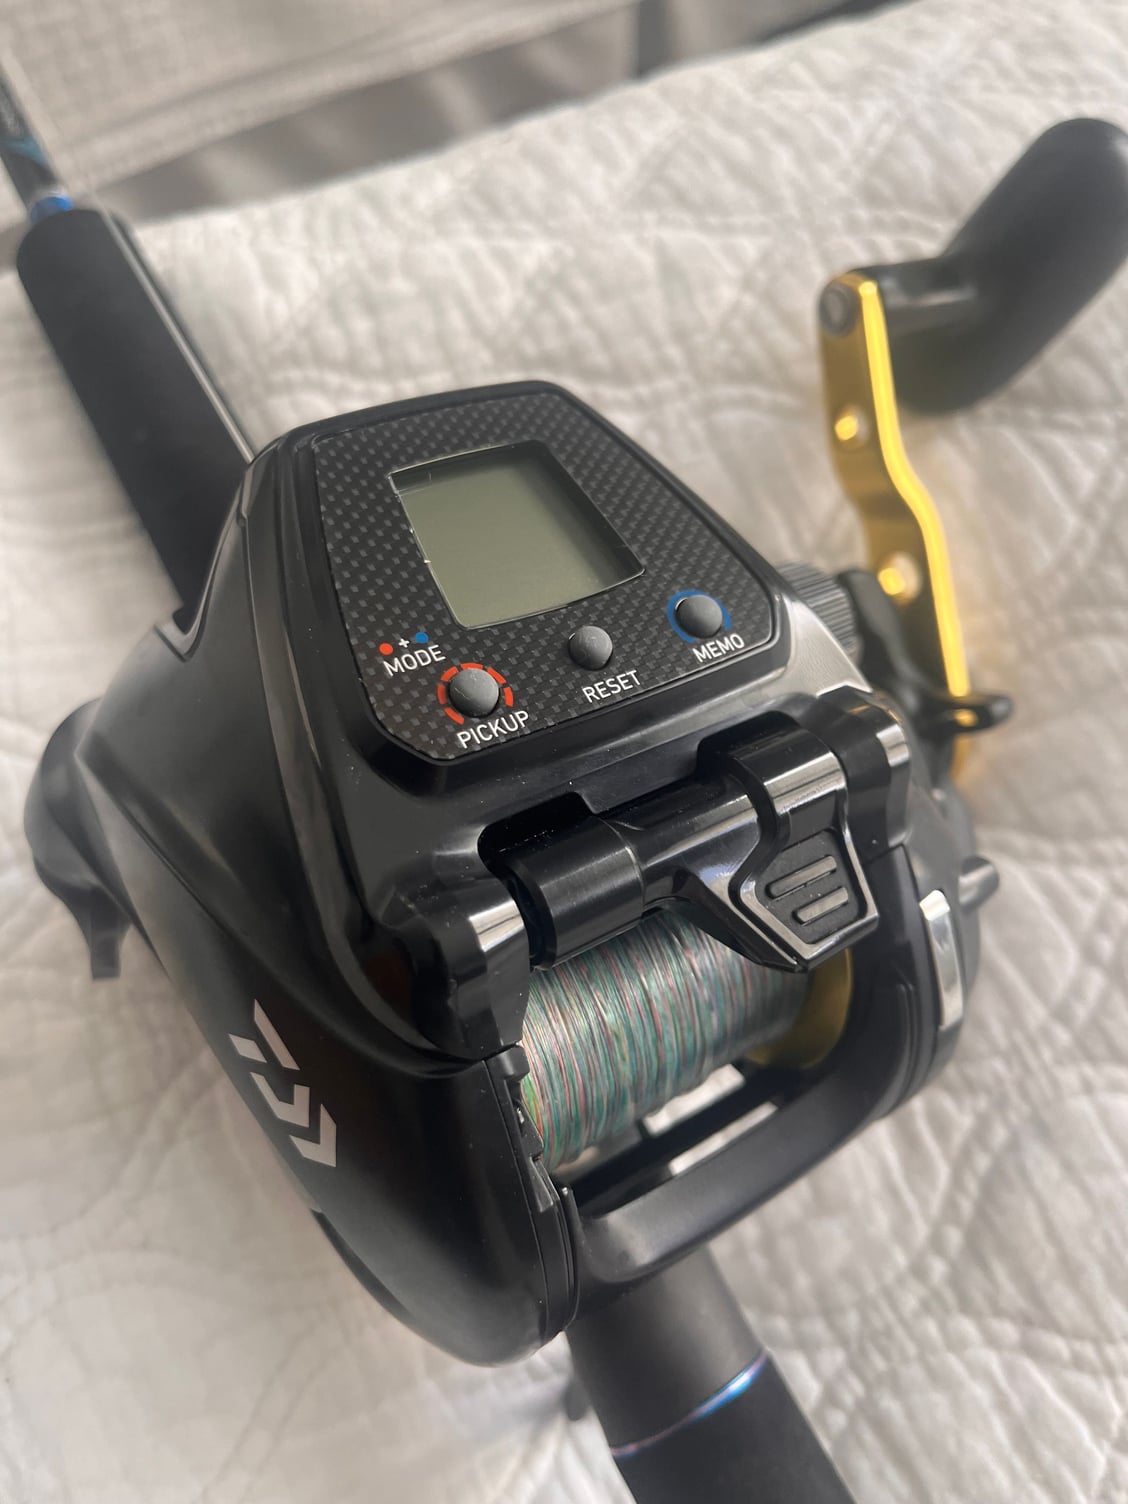 Like-new Tanacom 500 and Portable battery (SPJ) - The Hull Truth - Boating  and Fishing Forum